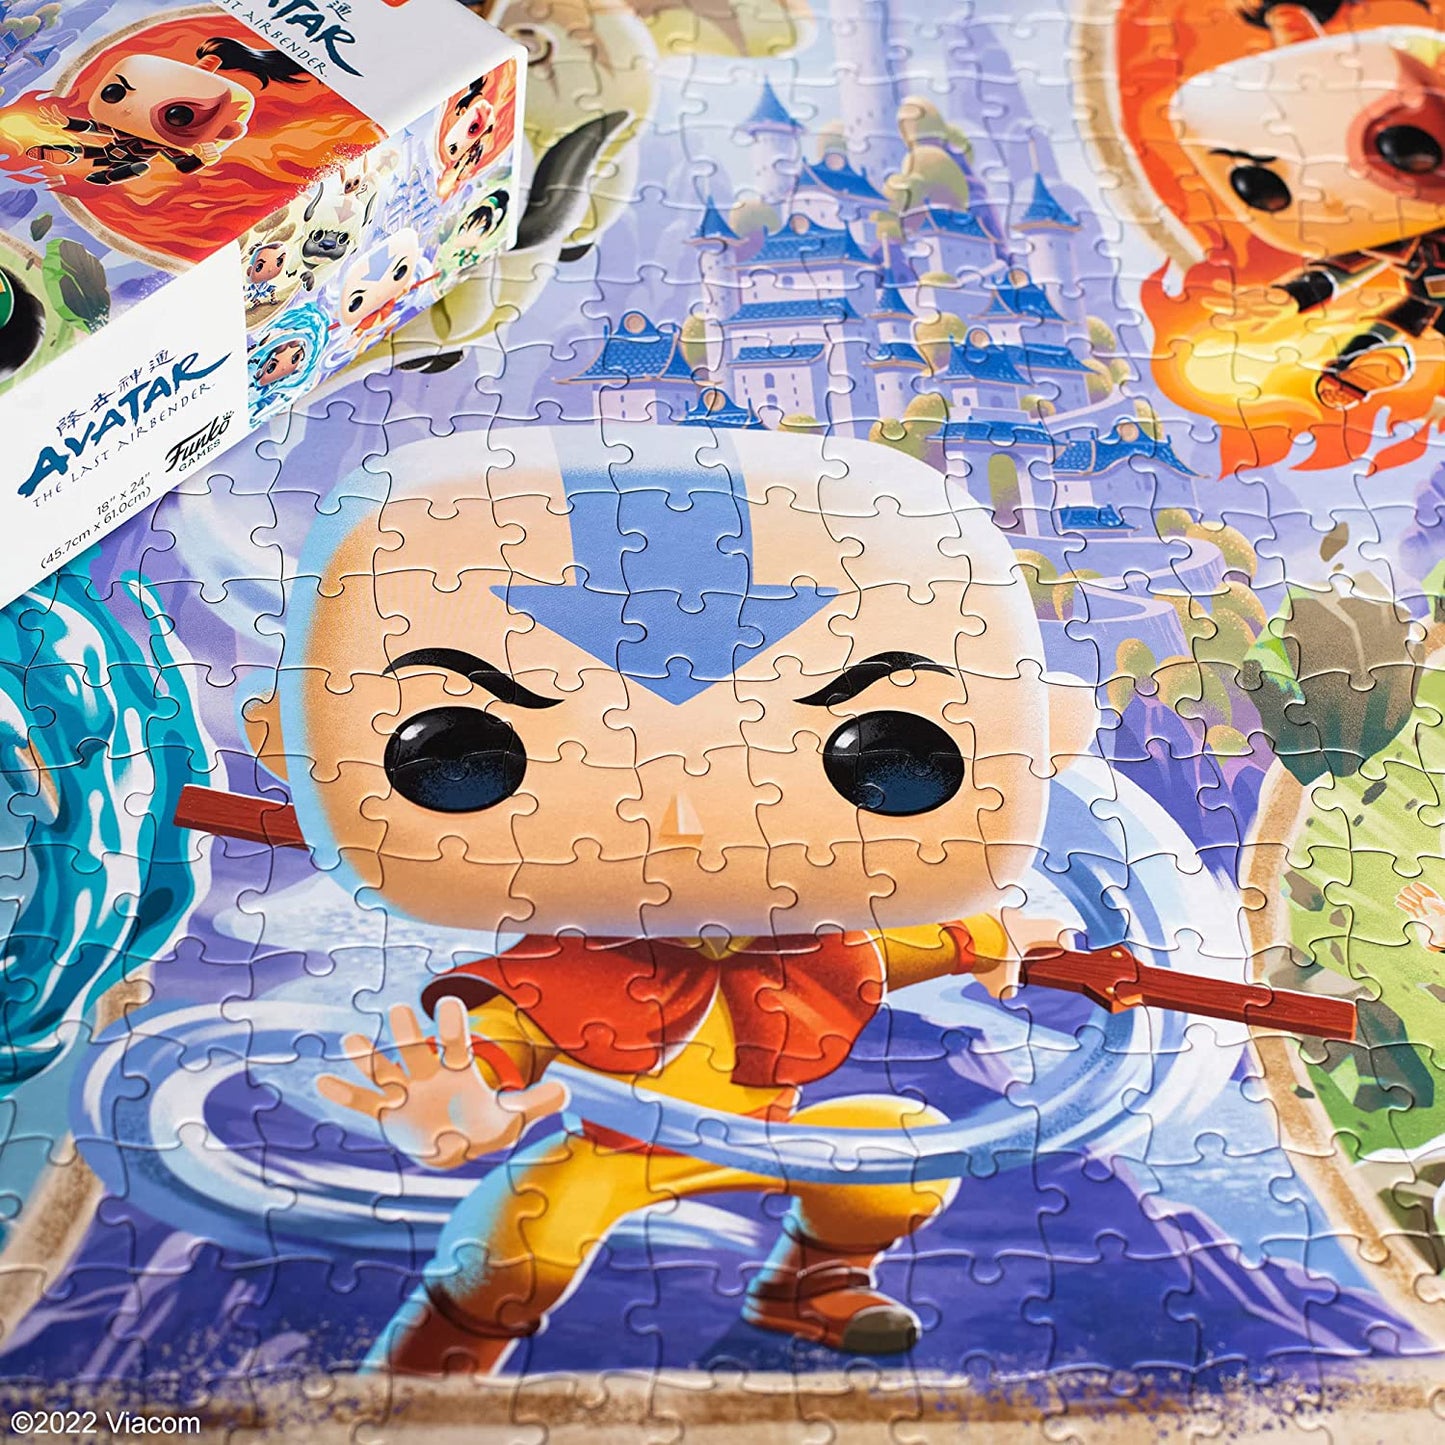 Pop! Puzzles - Avatar The Last Airbender - 500 Piece Jigsaw Puzzle